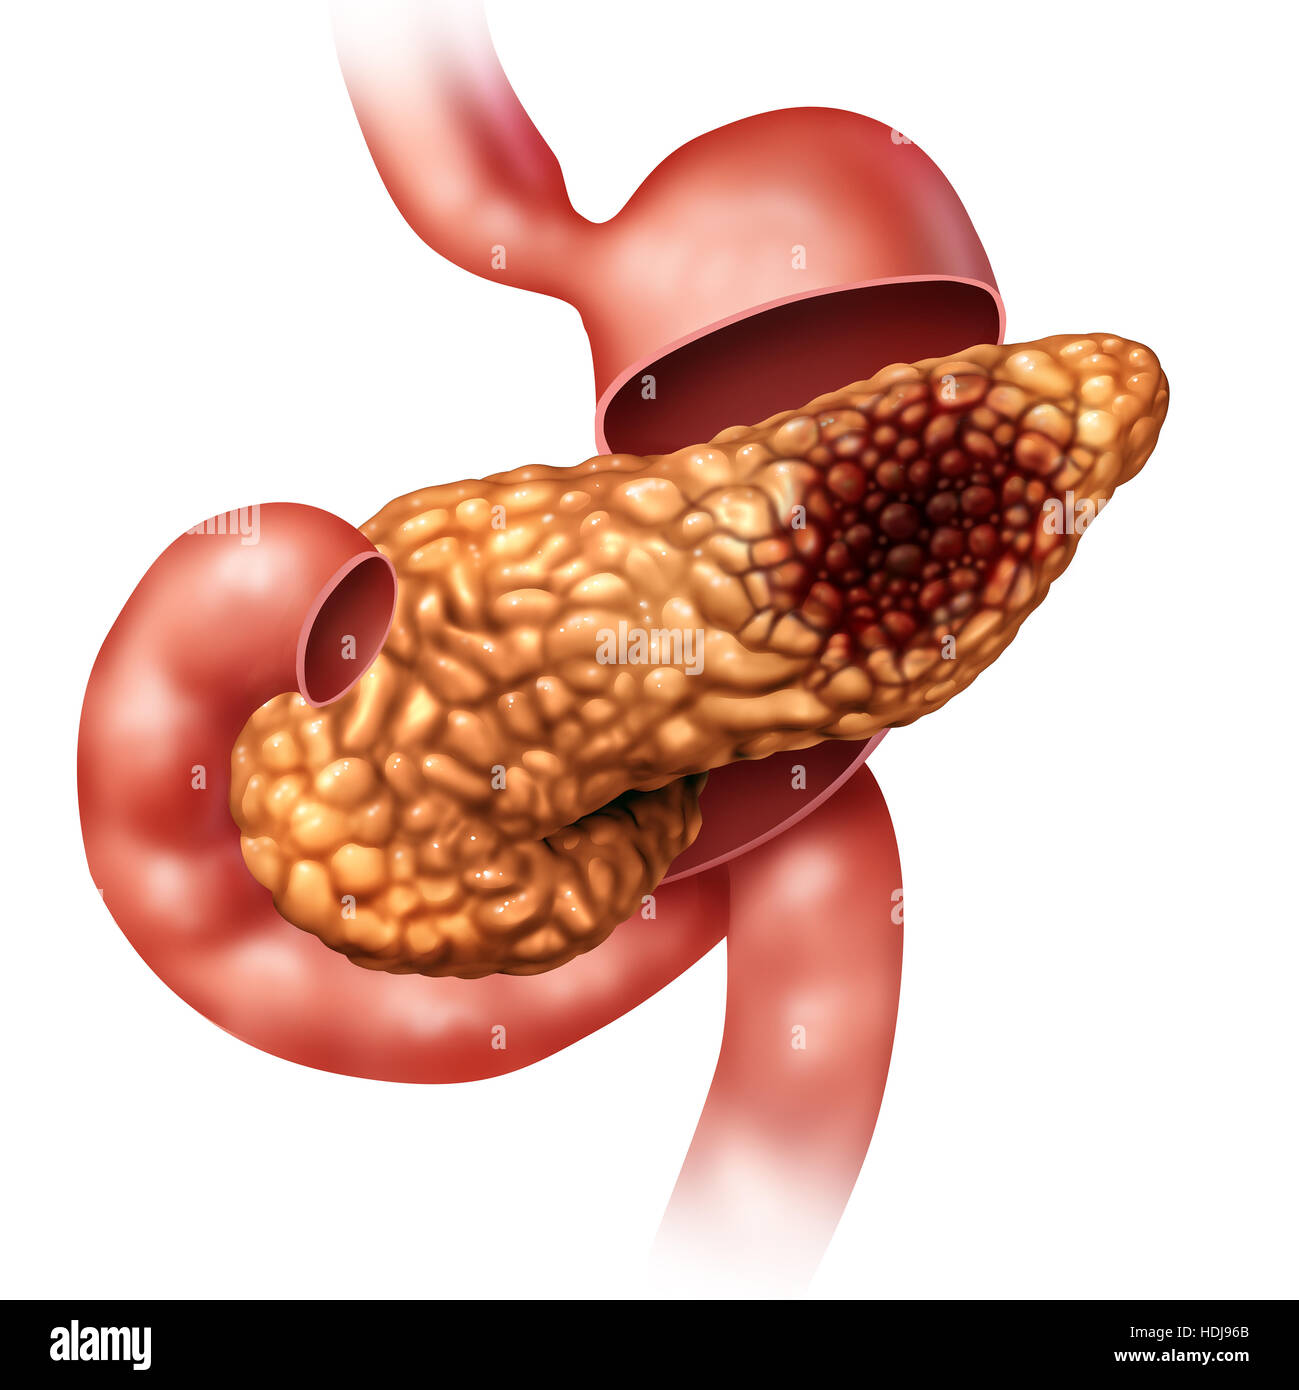 Pancreatic cancer concept and Pancreas malignant tumor symbol as a digestive gland body part with stomach cross section with a malignant tumor growth Stock Photo